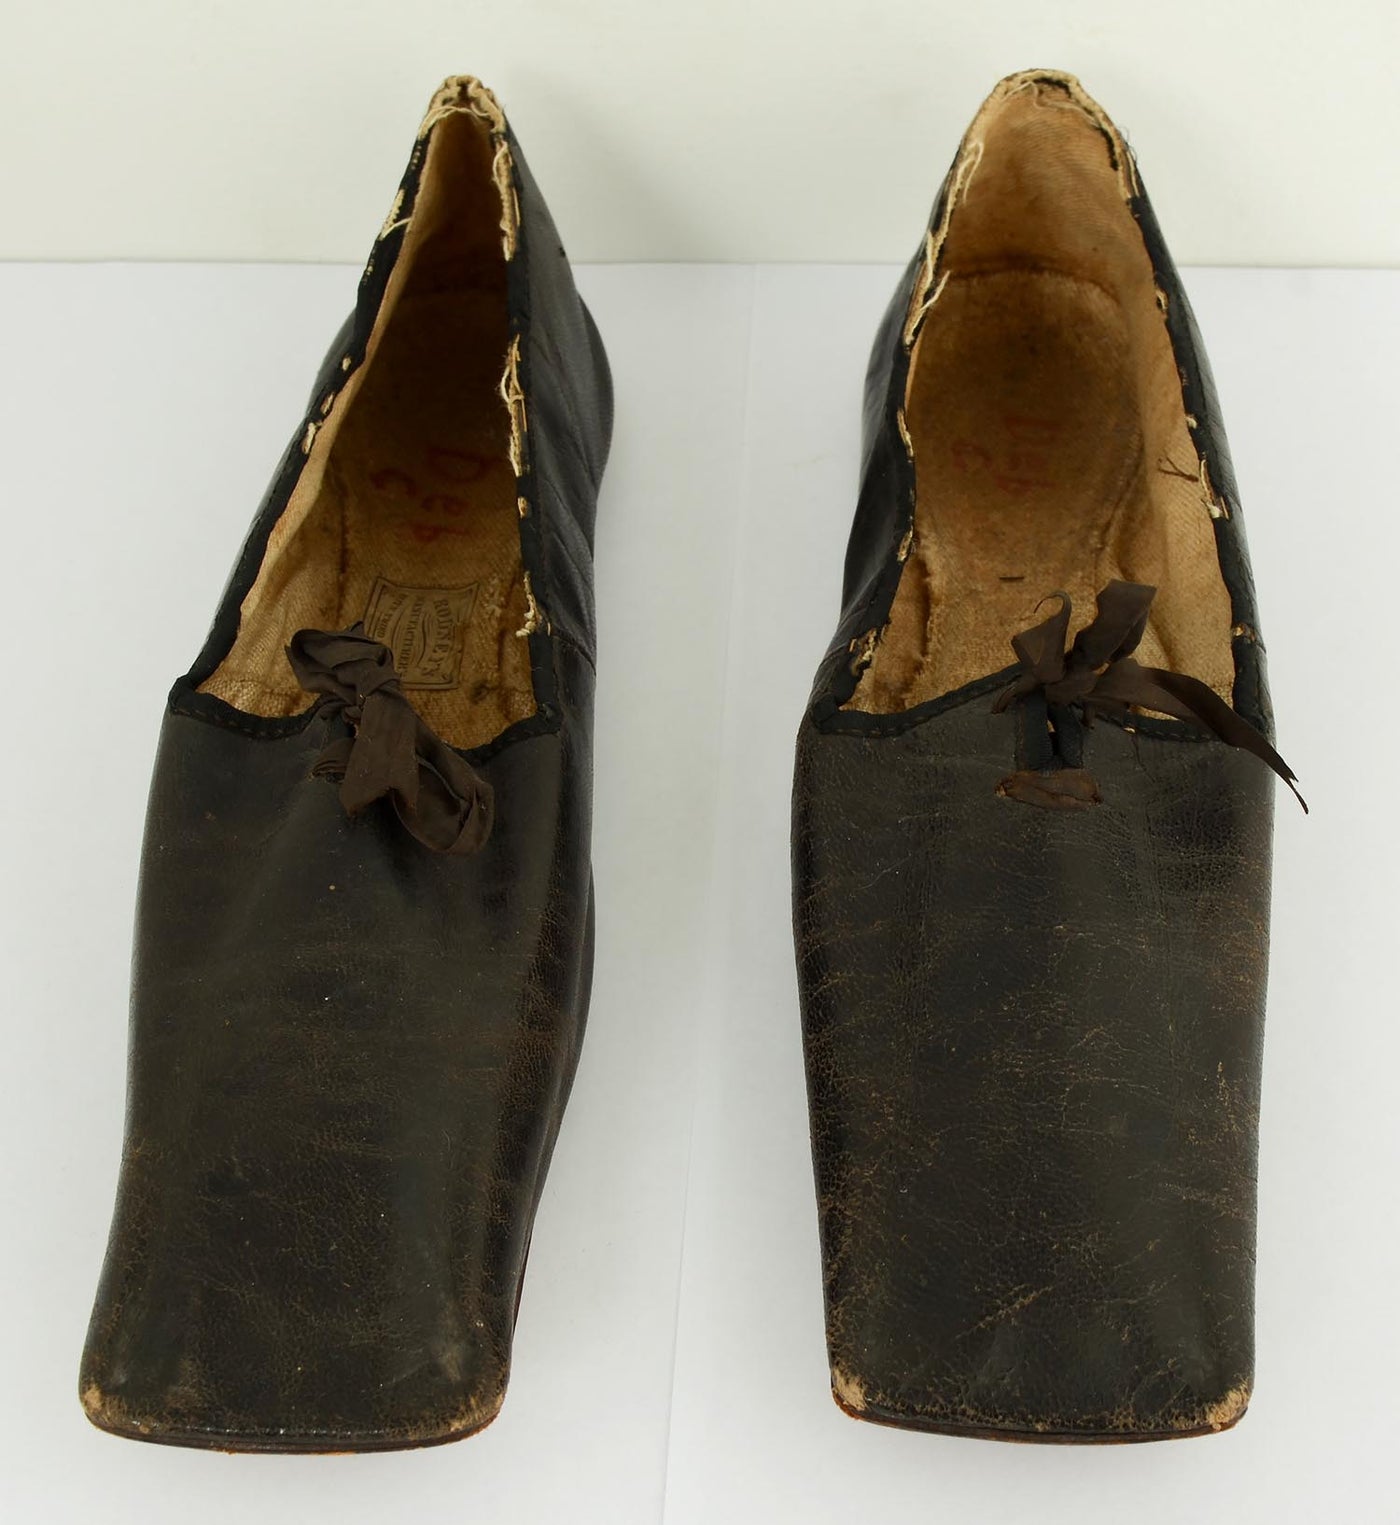 1387392-mid-19th-century-leather-shoes-2-front-view